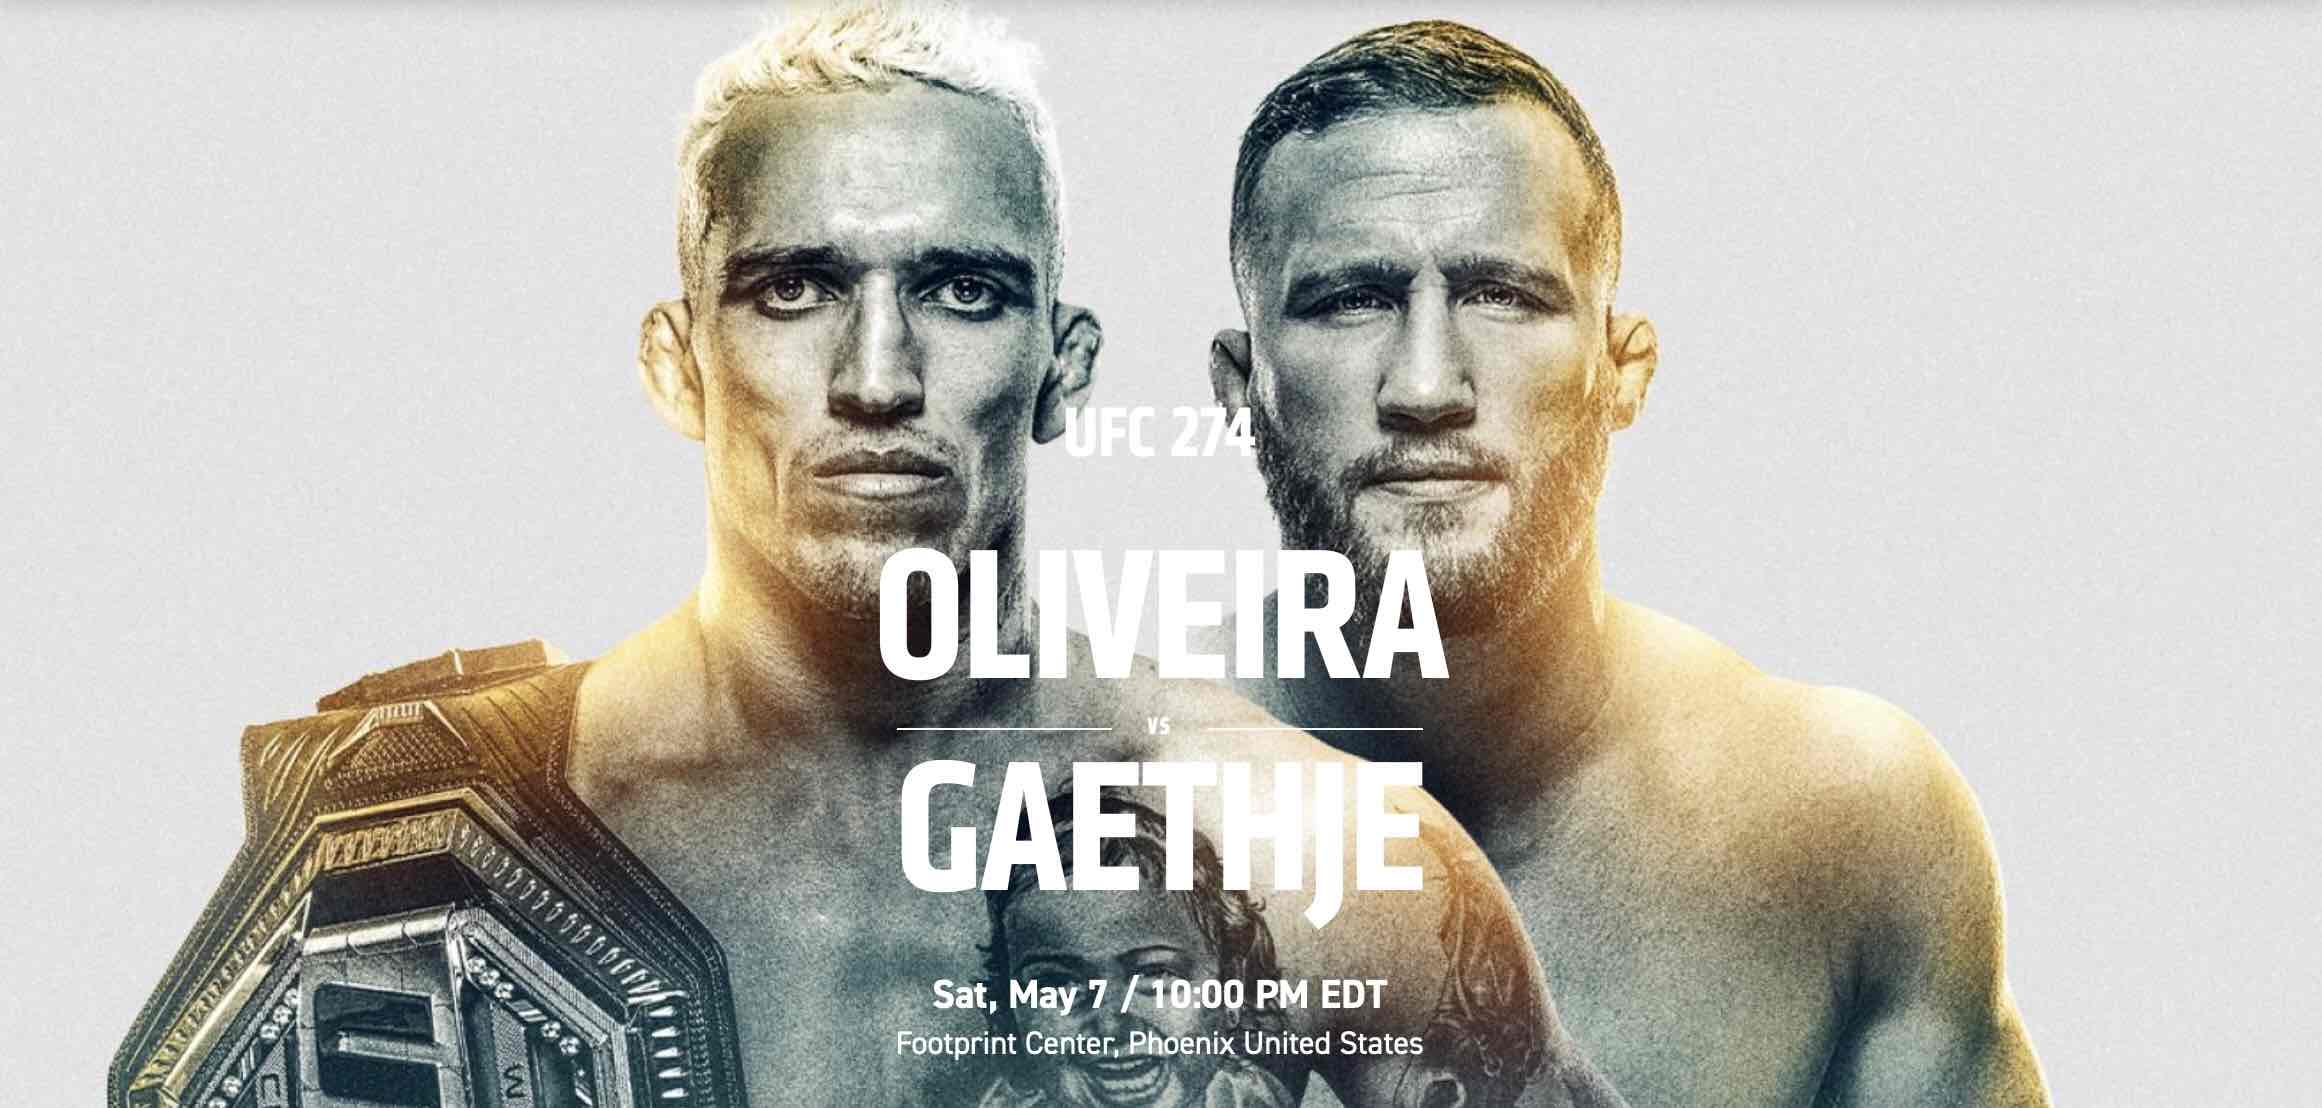 How to watch UFC 274 Oliveira vs Gaethje